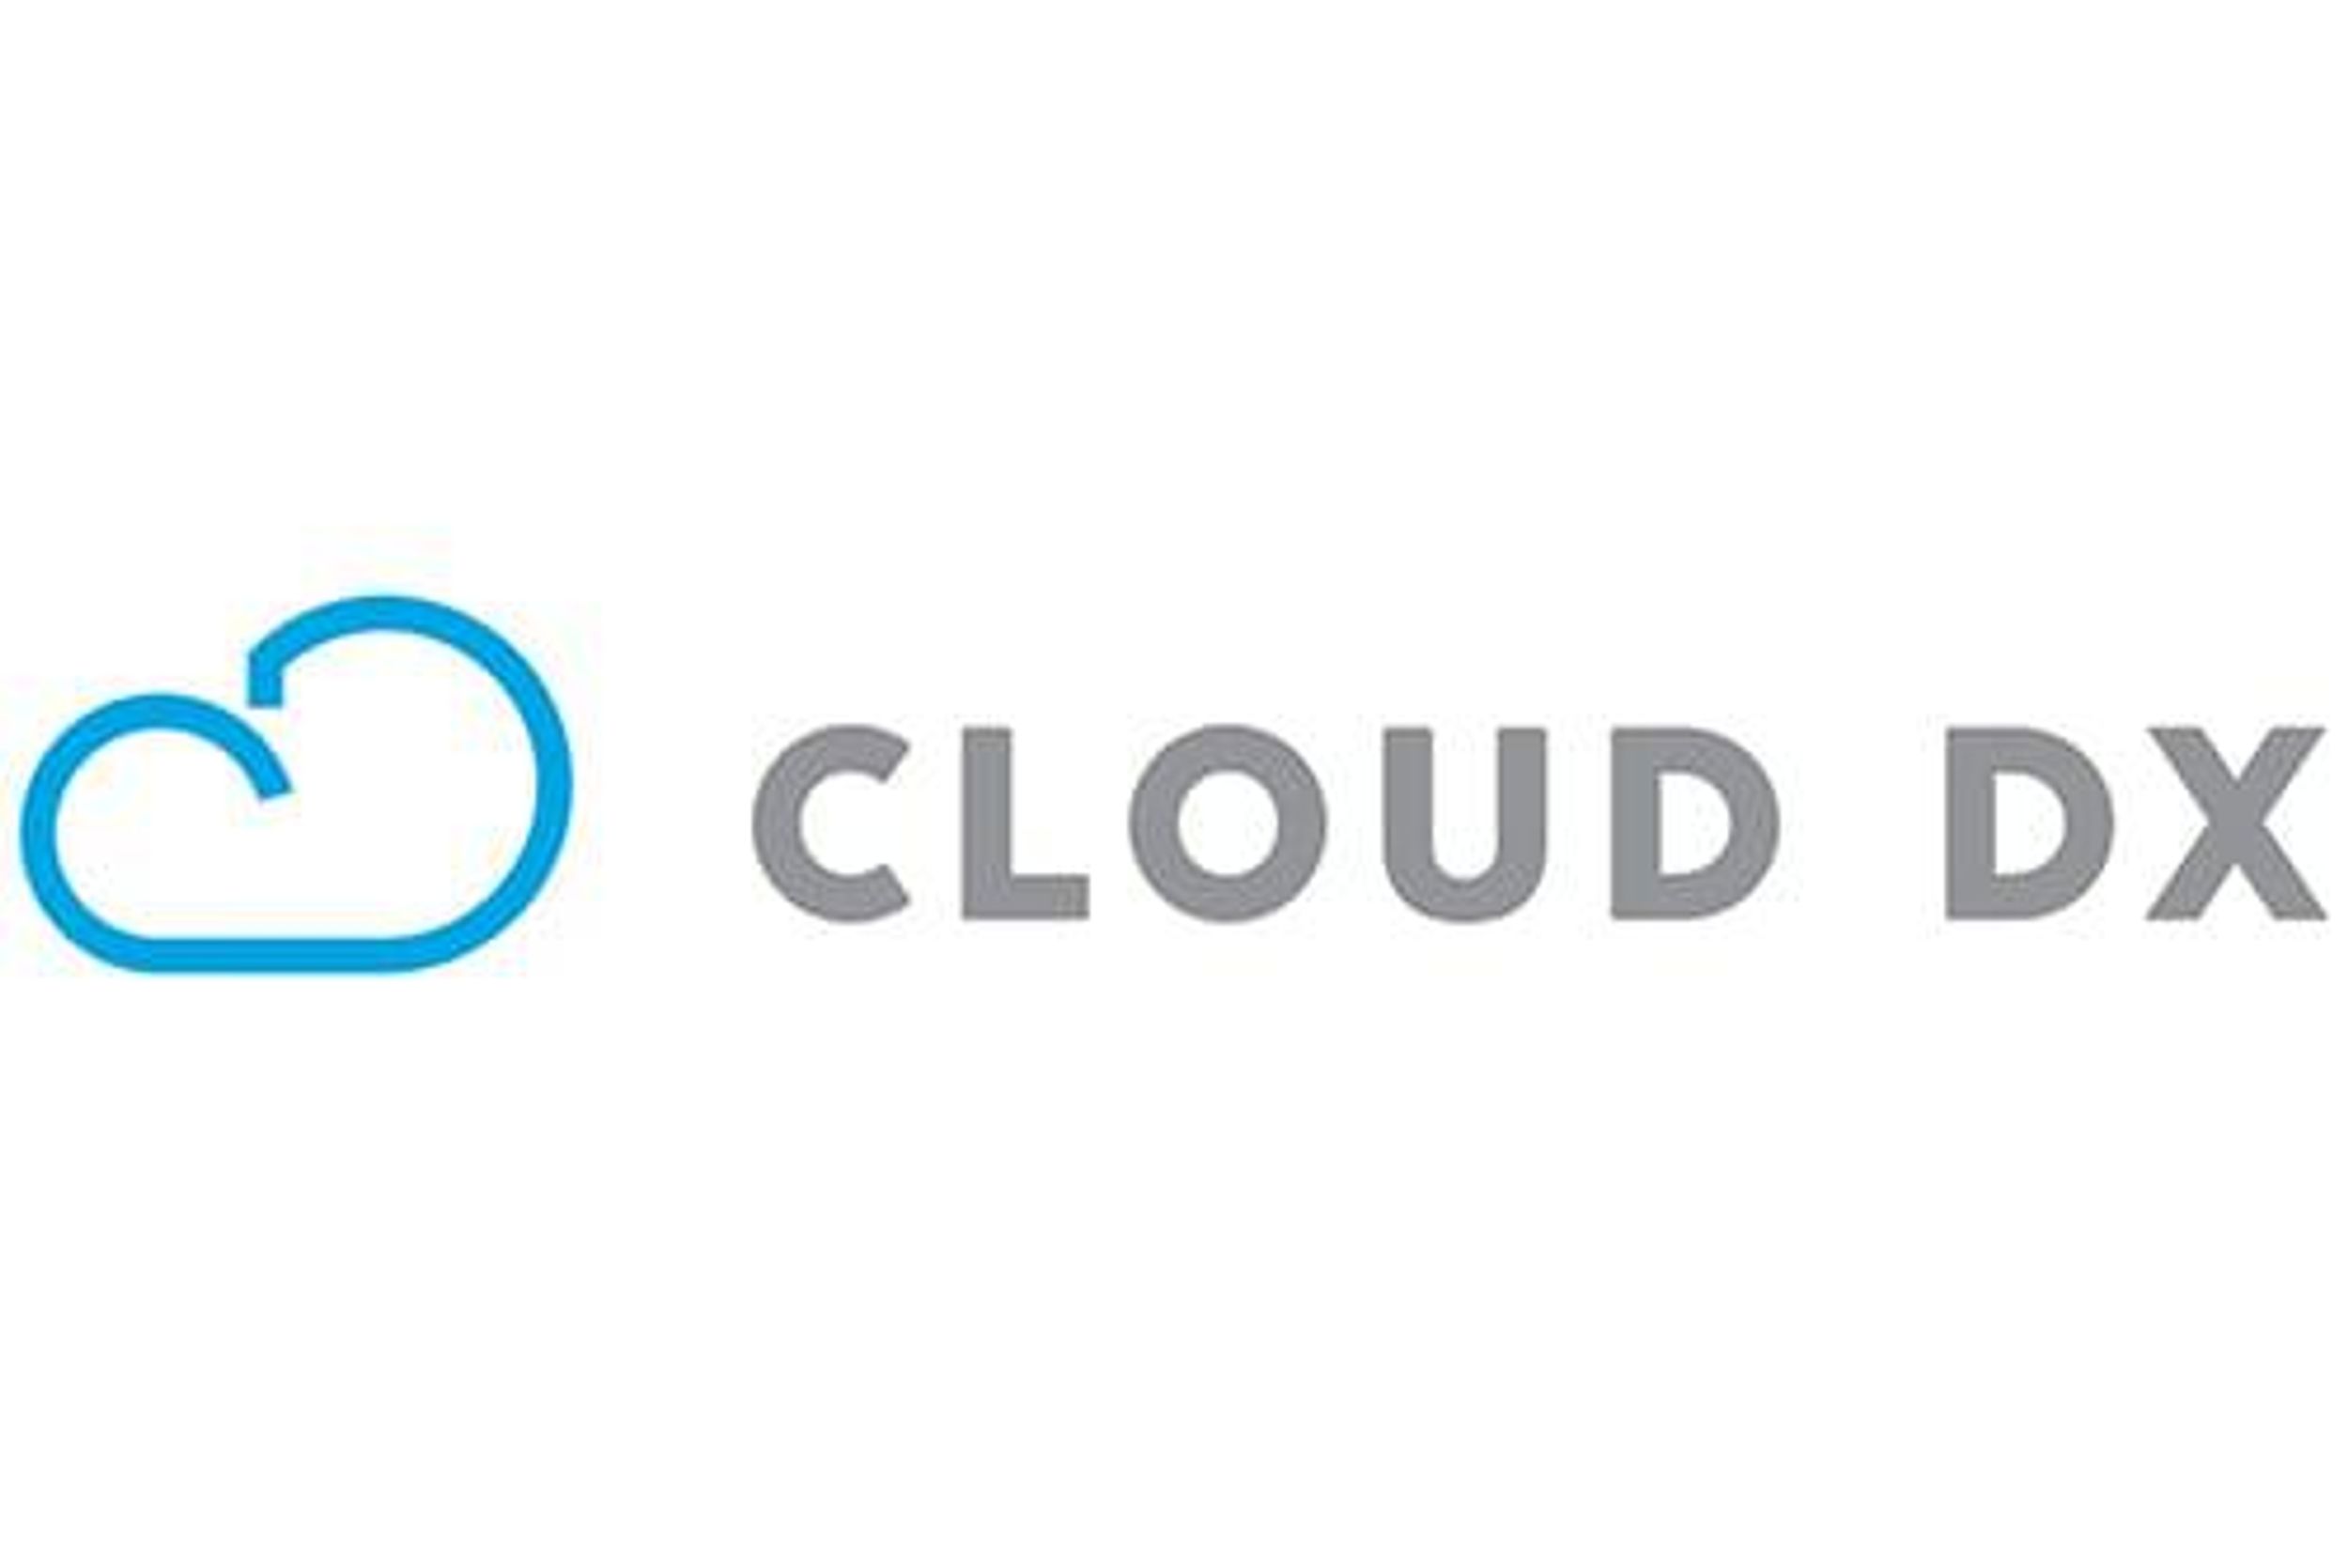 Cloud DX Announces Voluntary Extension of Lock-up Agreements with Company Insiders